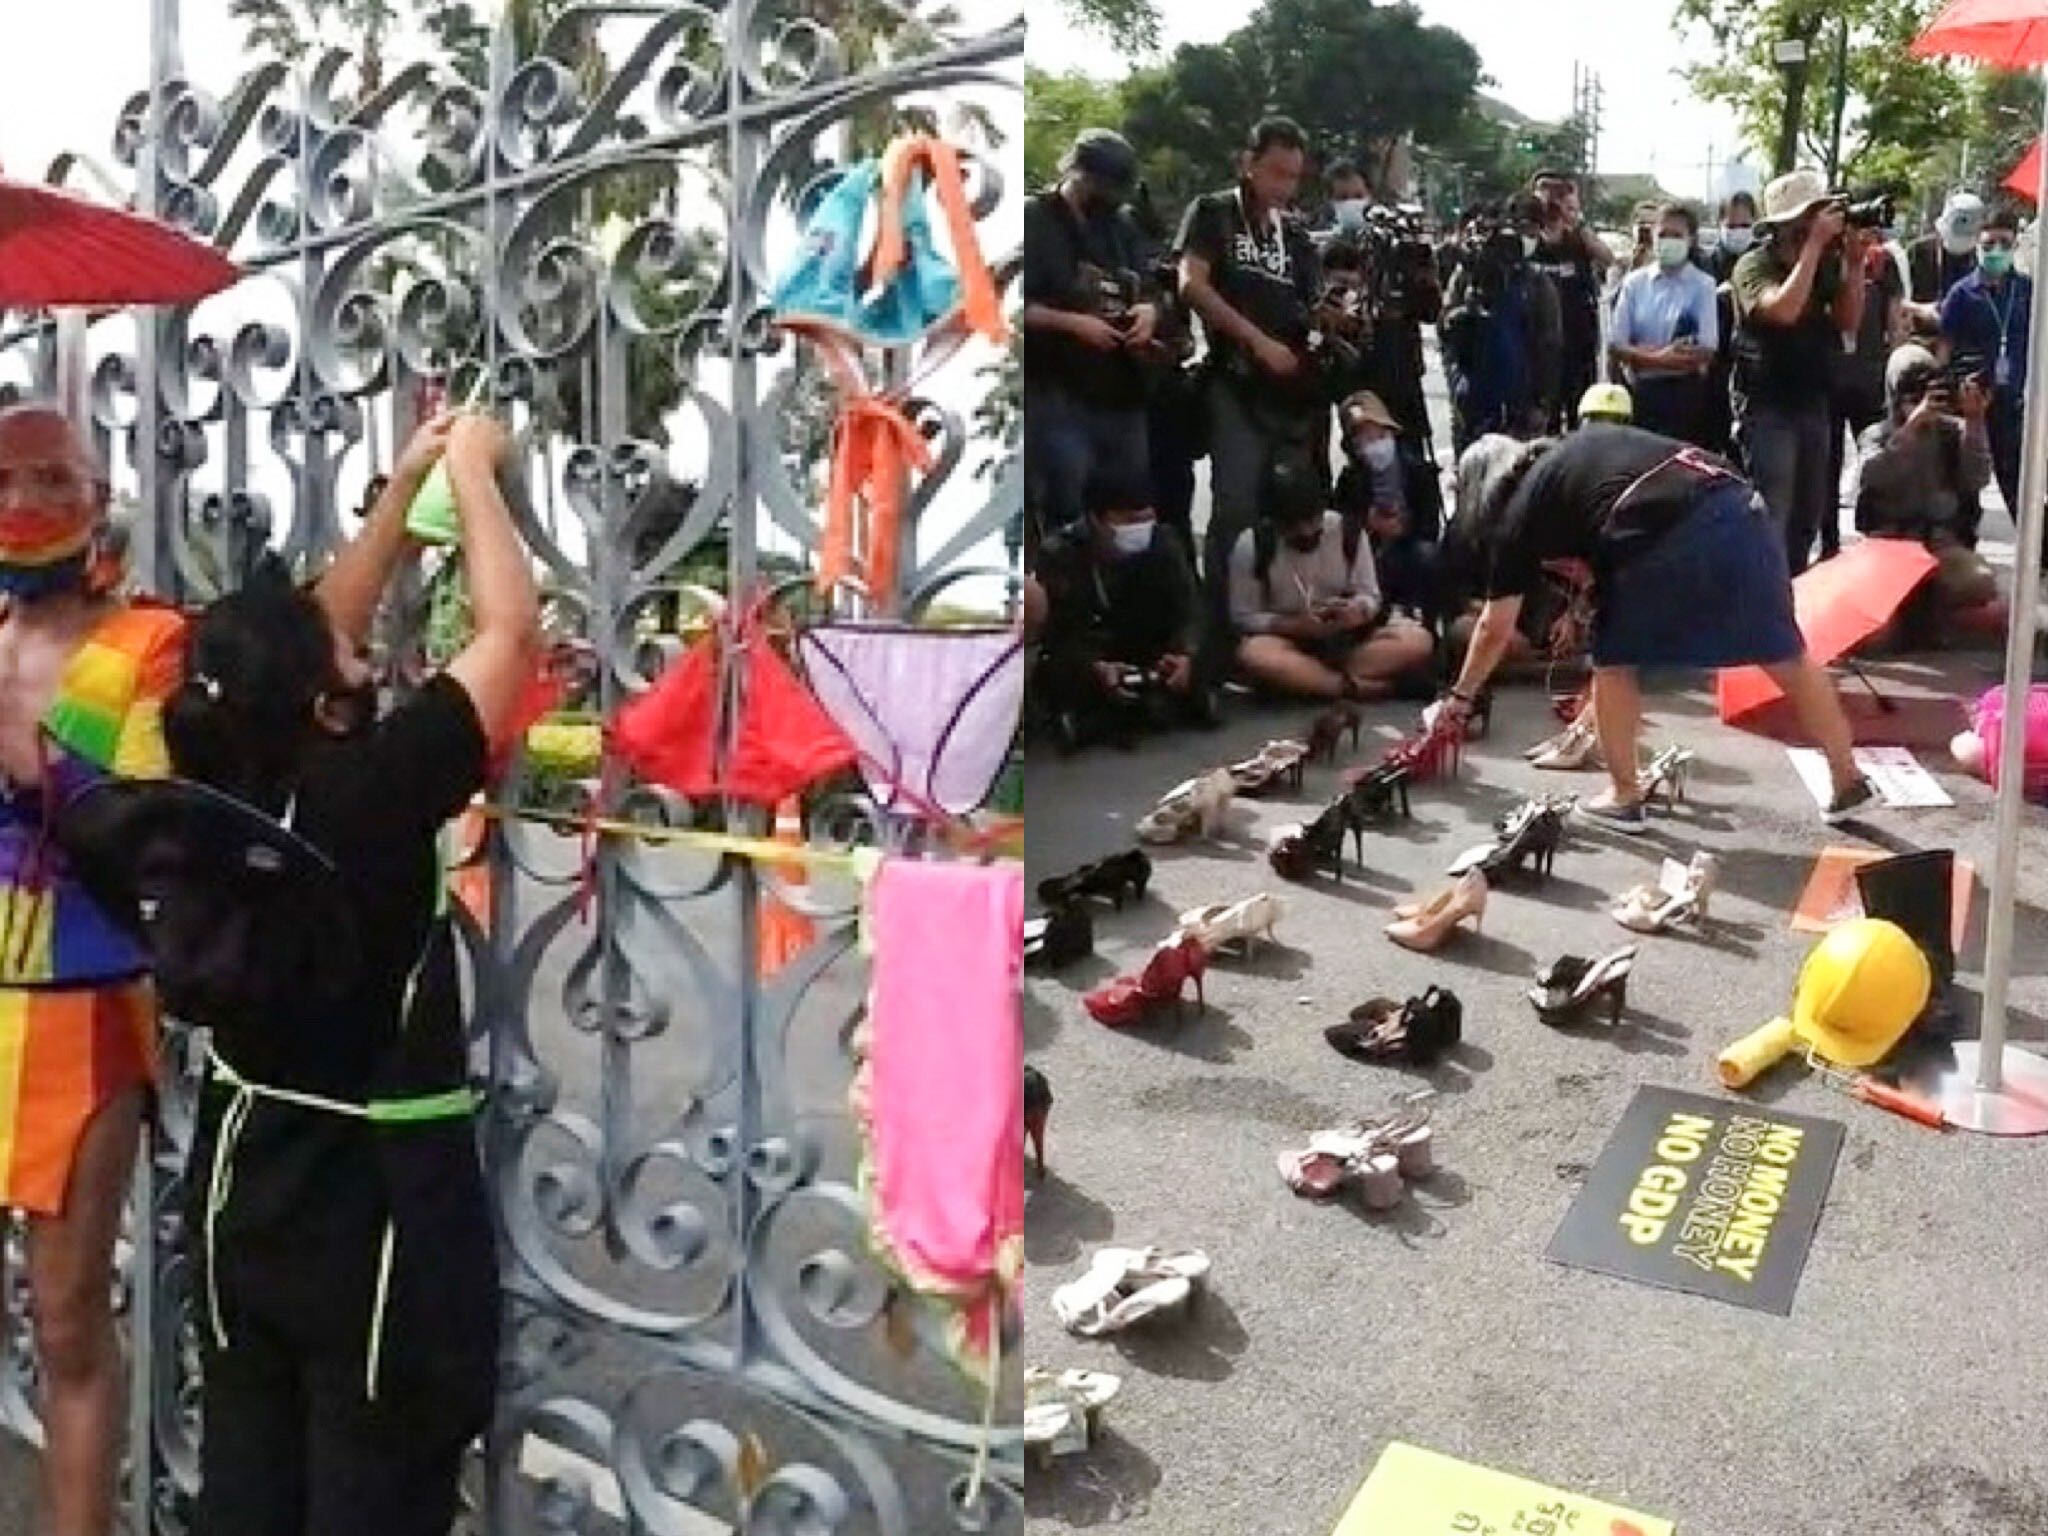 A sex worker ties underpants at the Government House, at left, and sex workers laying high heels in front of the venue, at right. Photos: Empower Chiang Mai / Facebook
